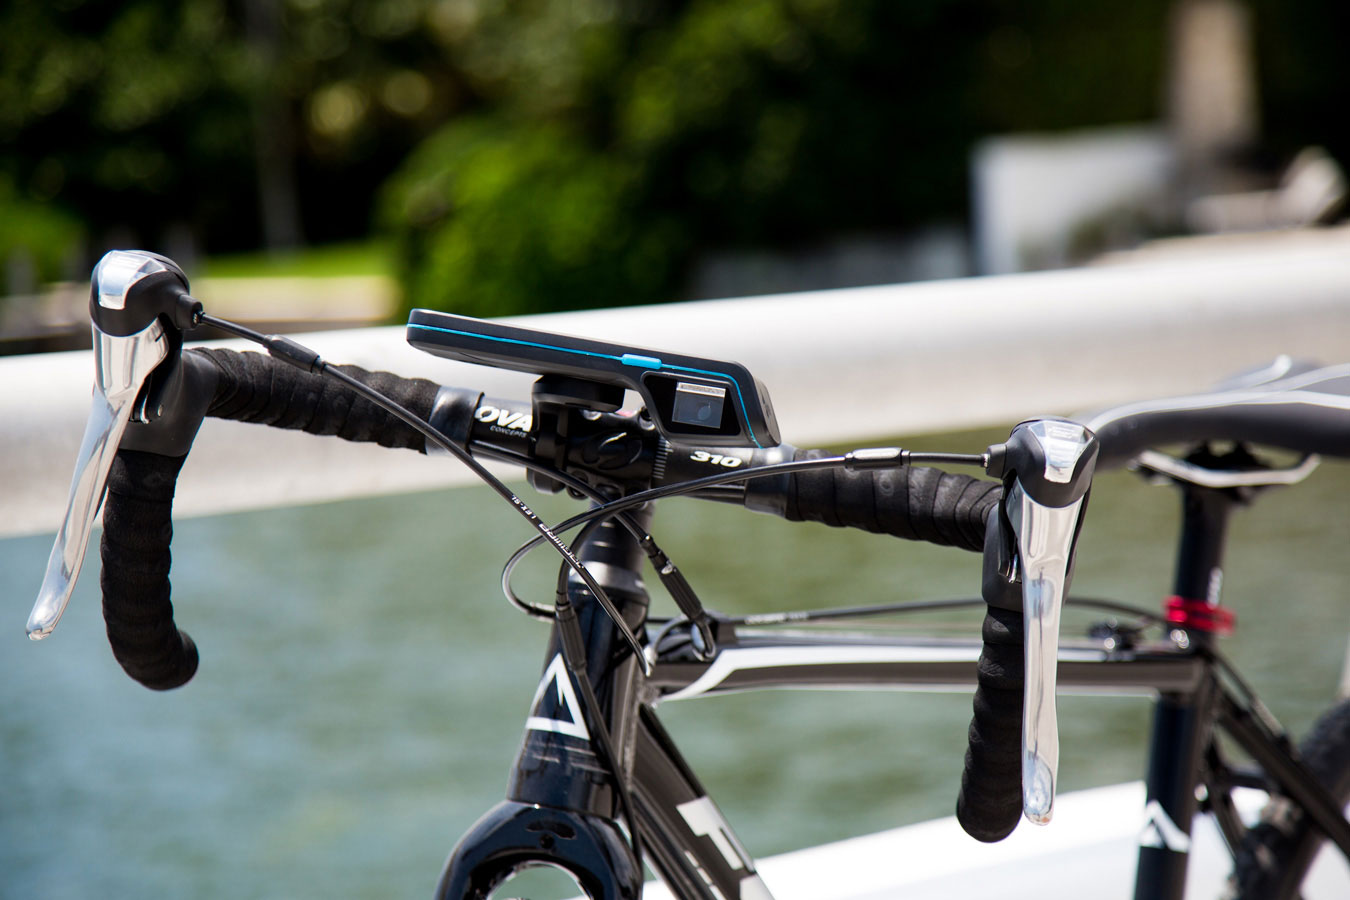 bycle case and app turns iphone into bike computer for tracking rides mount 2